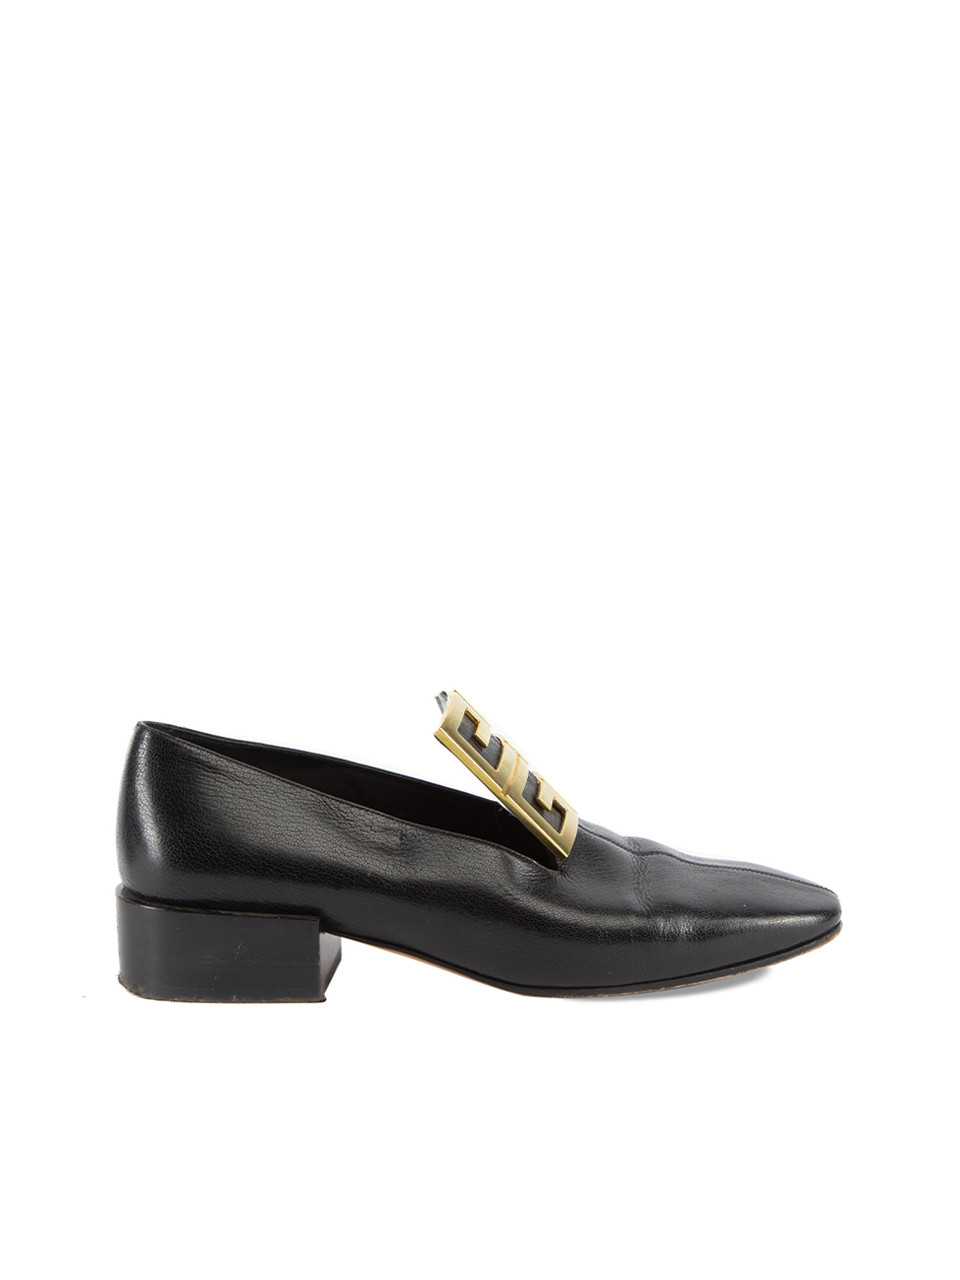 Givenchy Black Logo Buckle Slip On Loafers